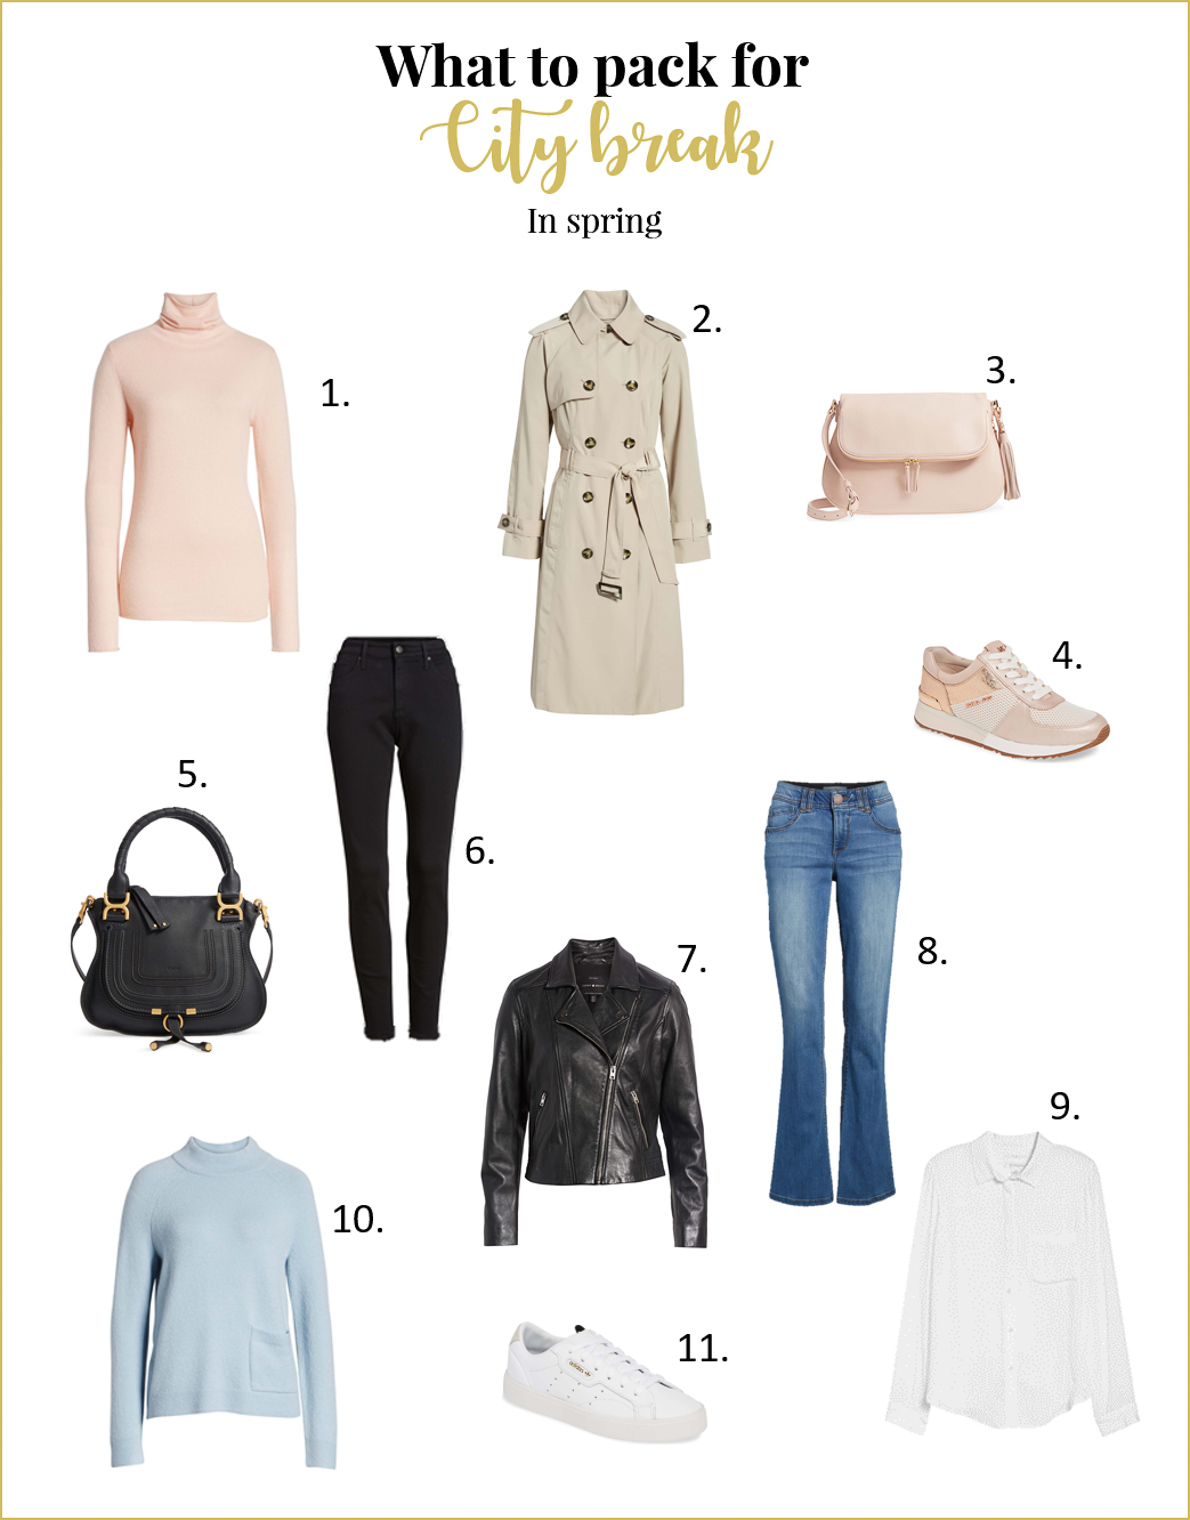 What to pack for your city break in spring